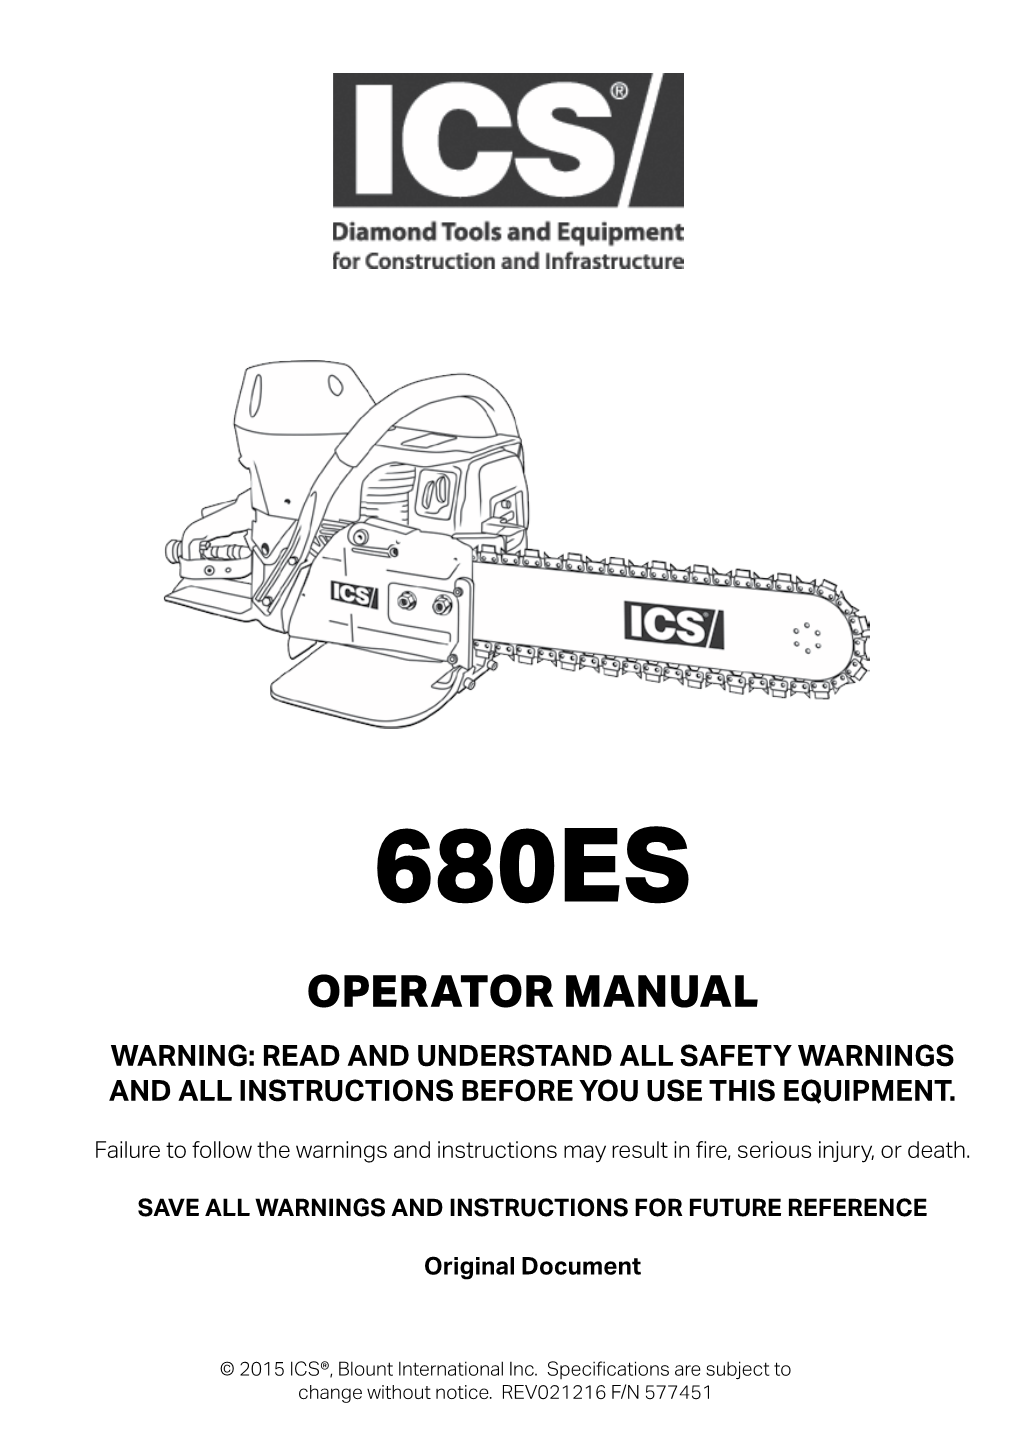 Operator Manual Warning: Read and Understand All Safety Warnings and All Instructions Before You Use This Equipment